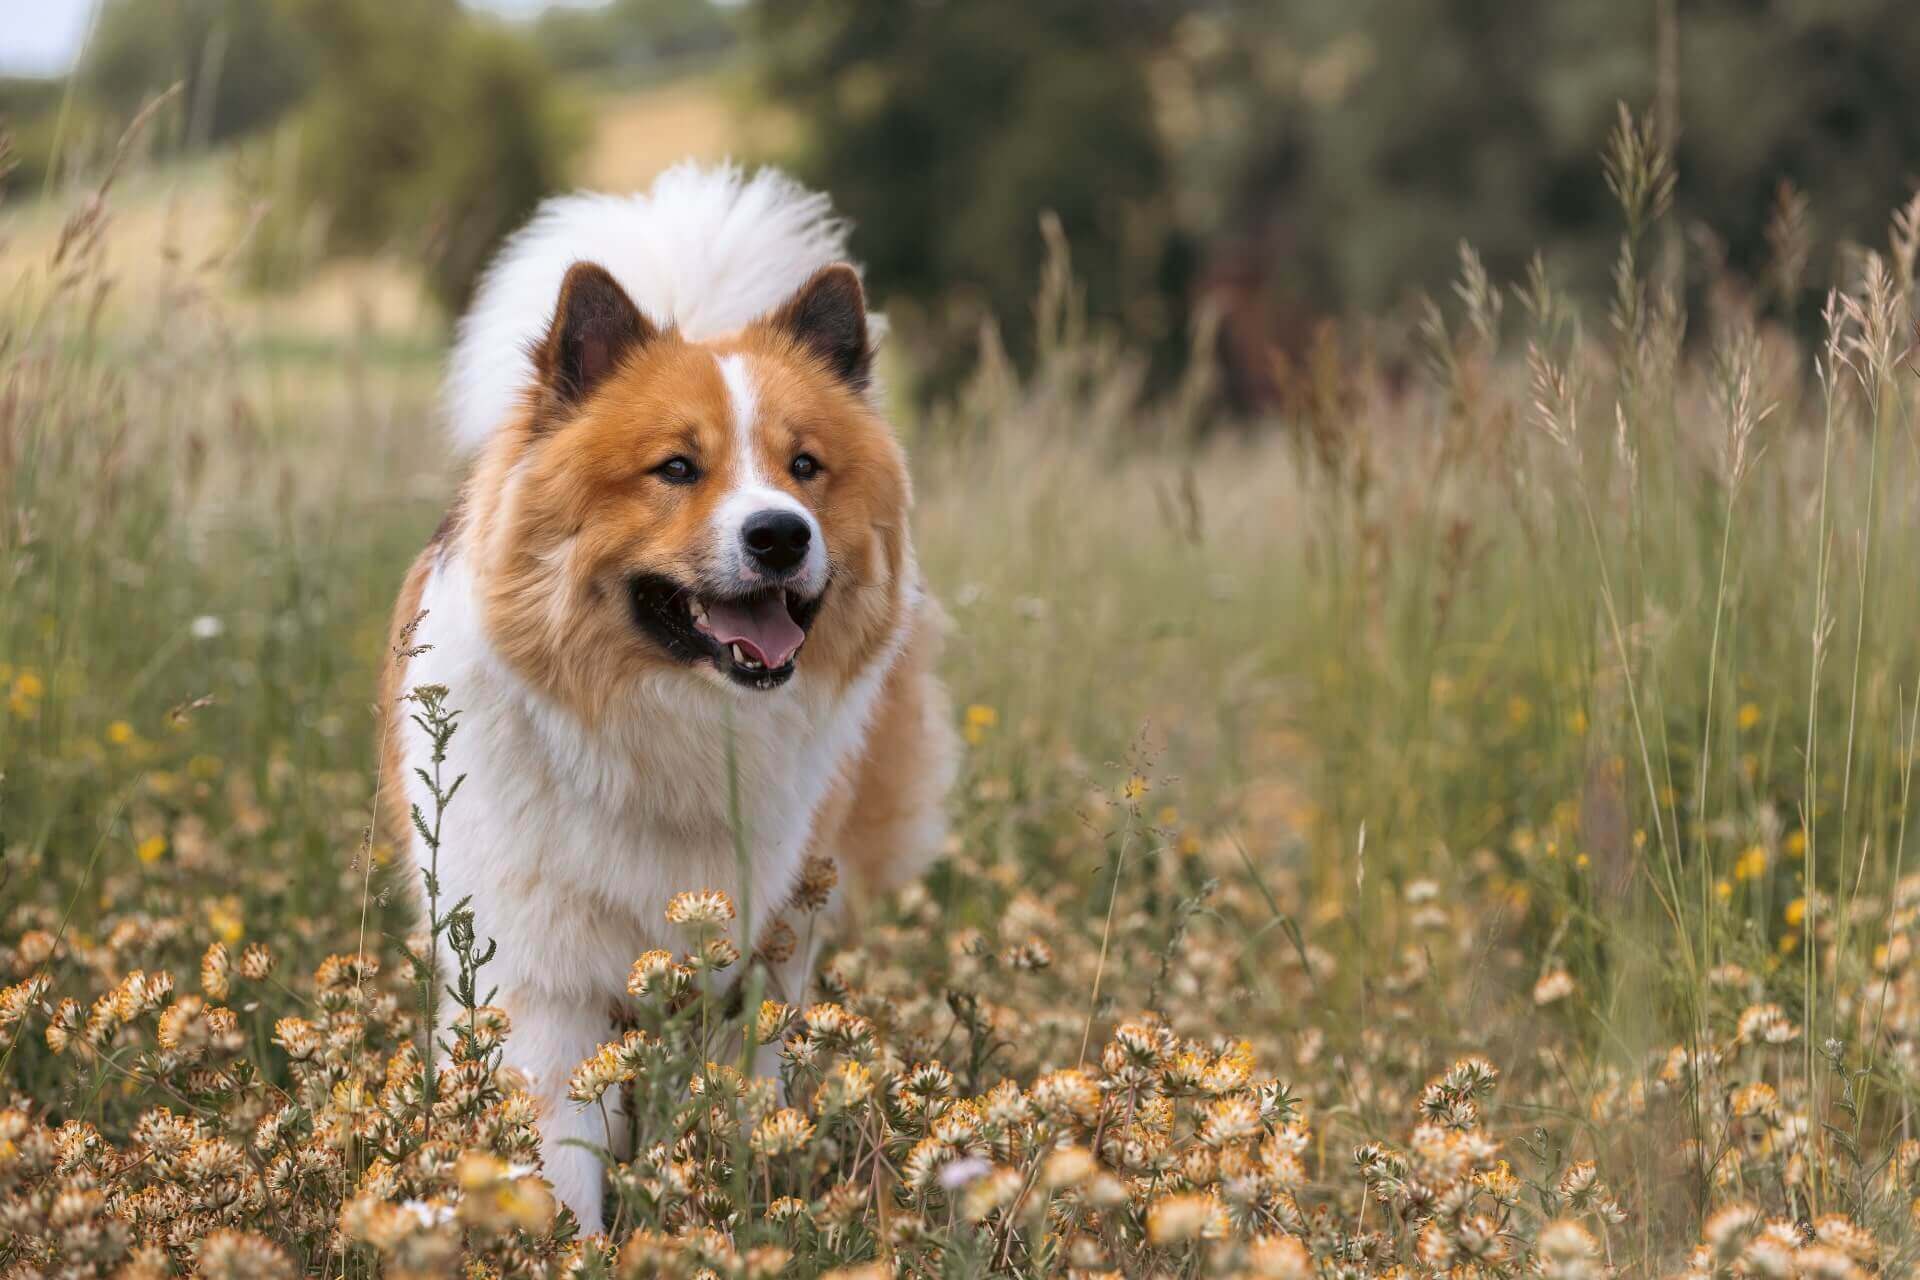 white and brown dog standing outside in field of grass and flowers